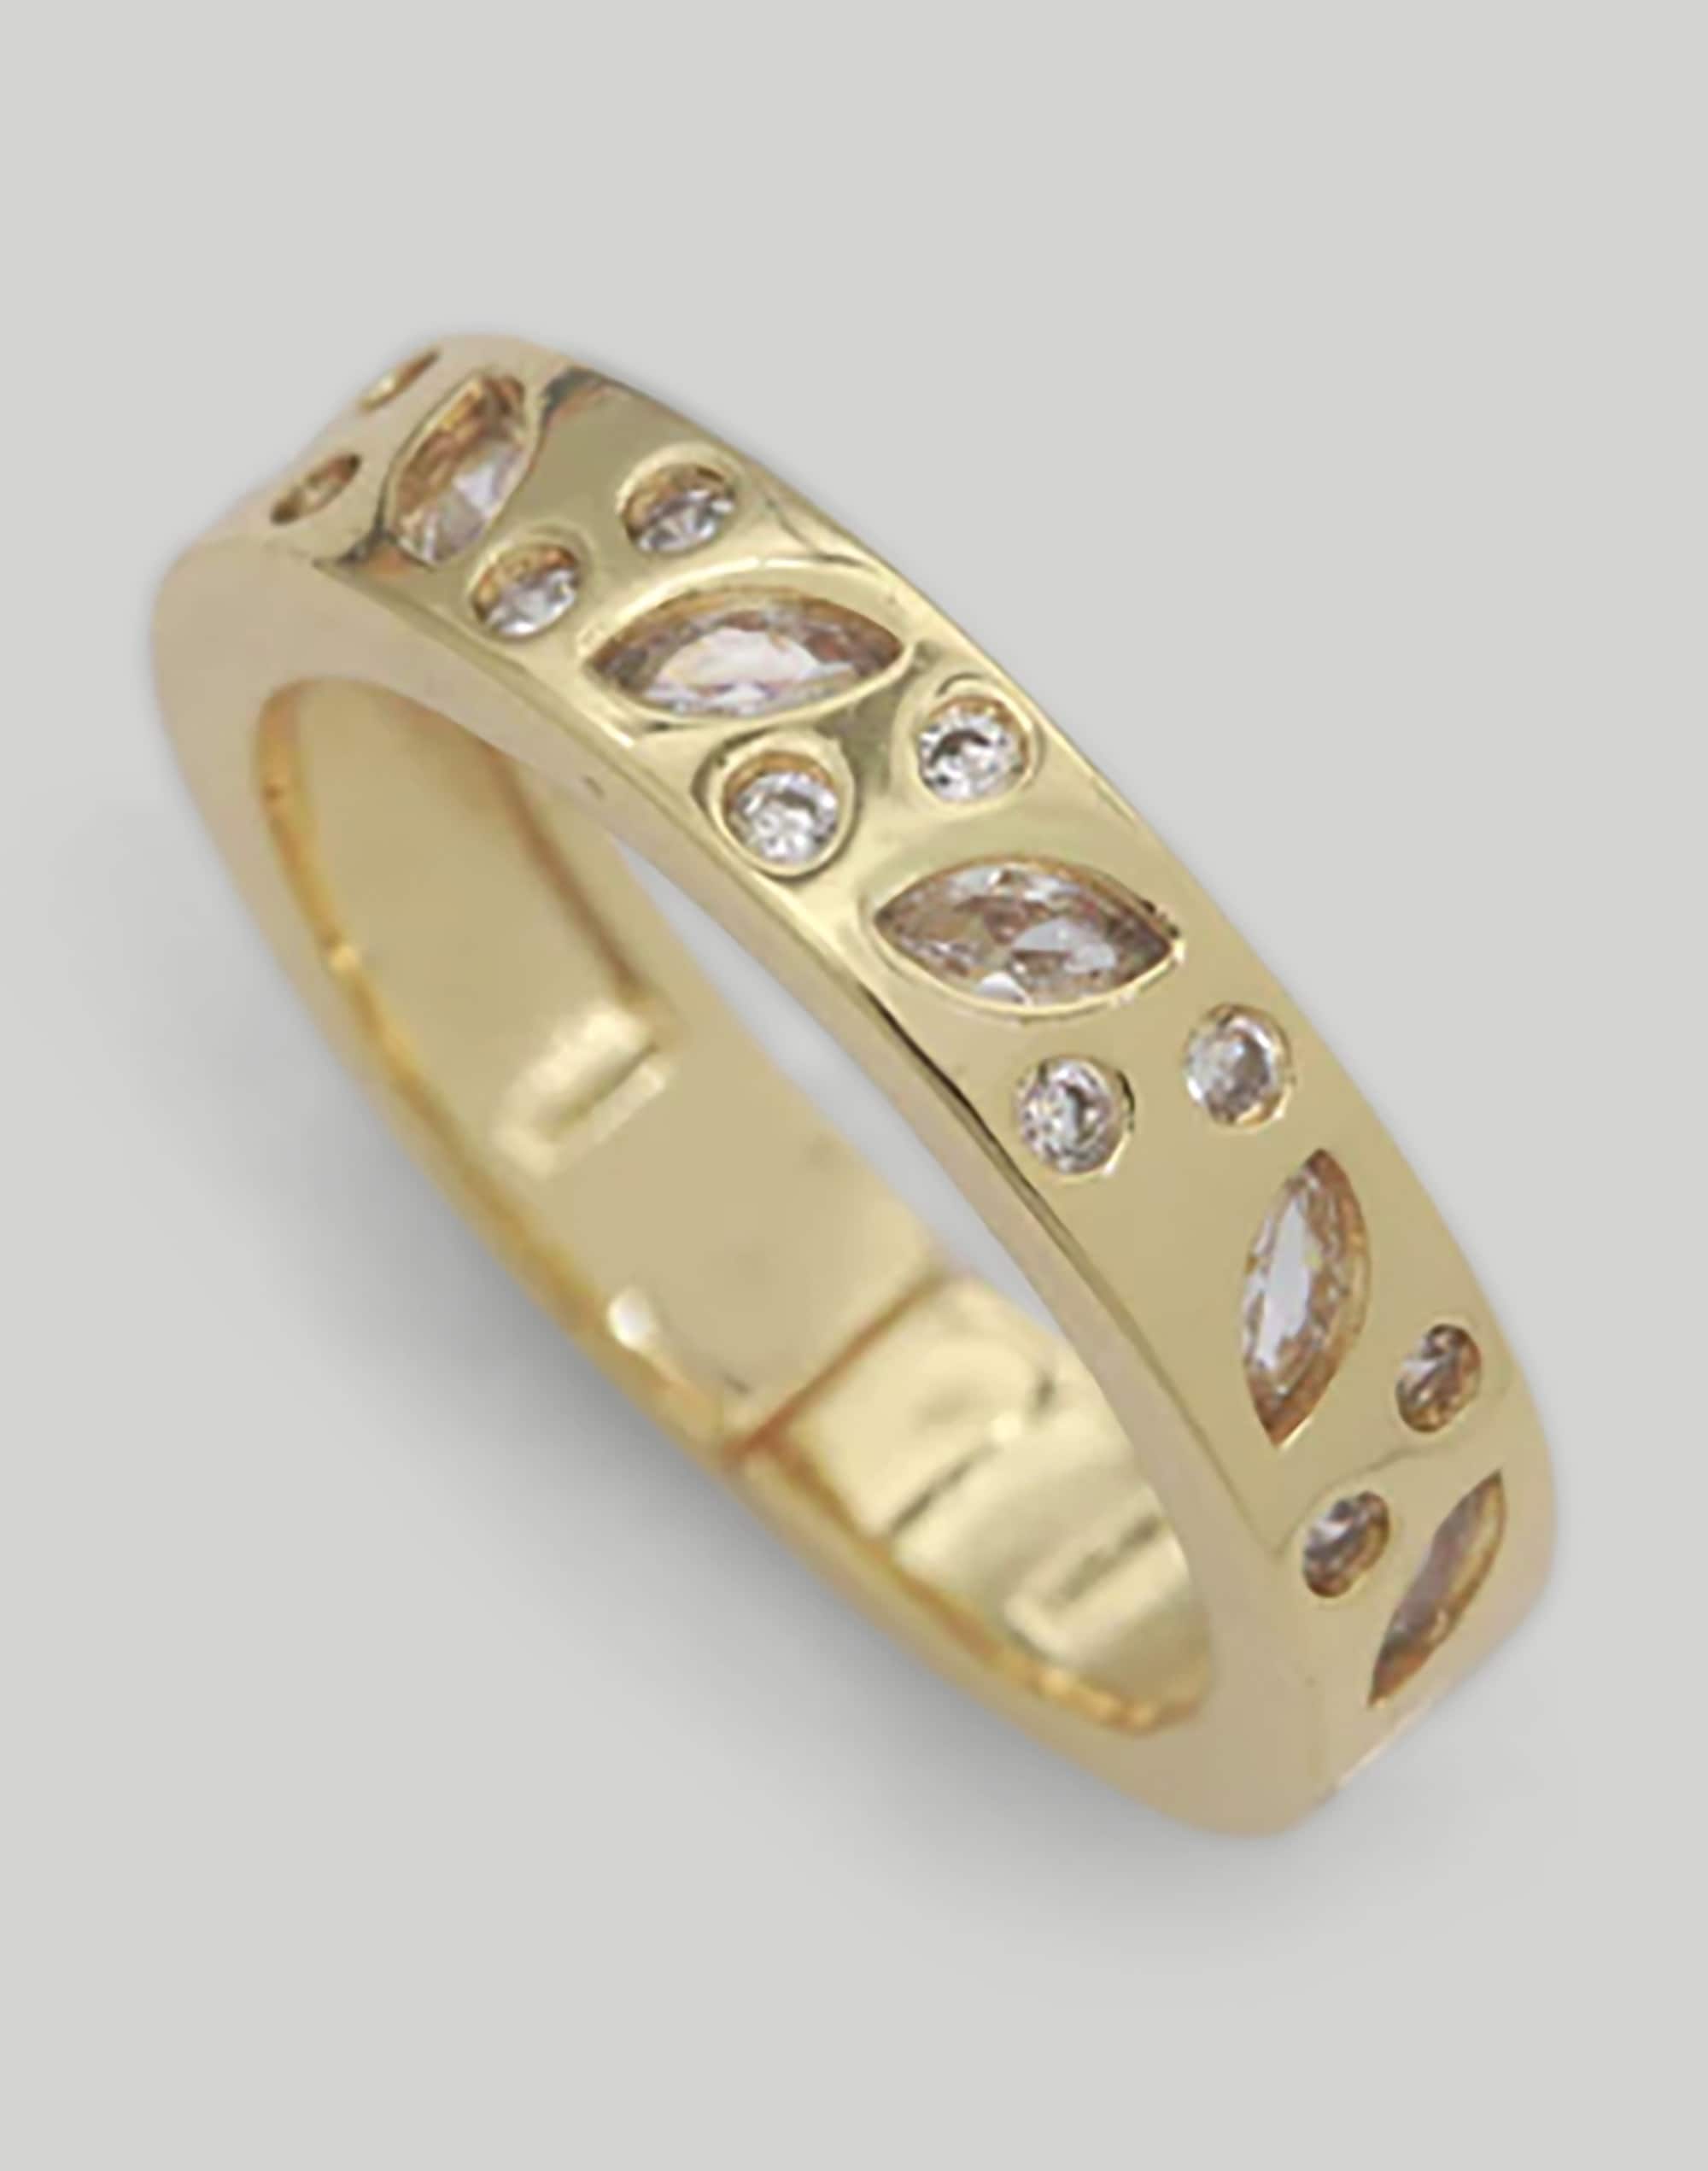 Abcrete & Co. The Gold Stone Stackable Ring